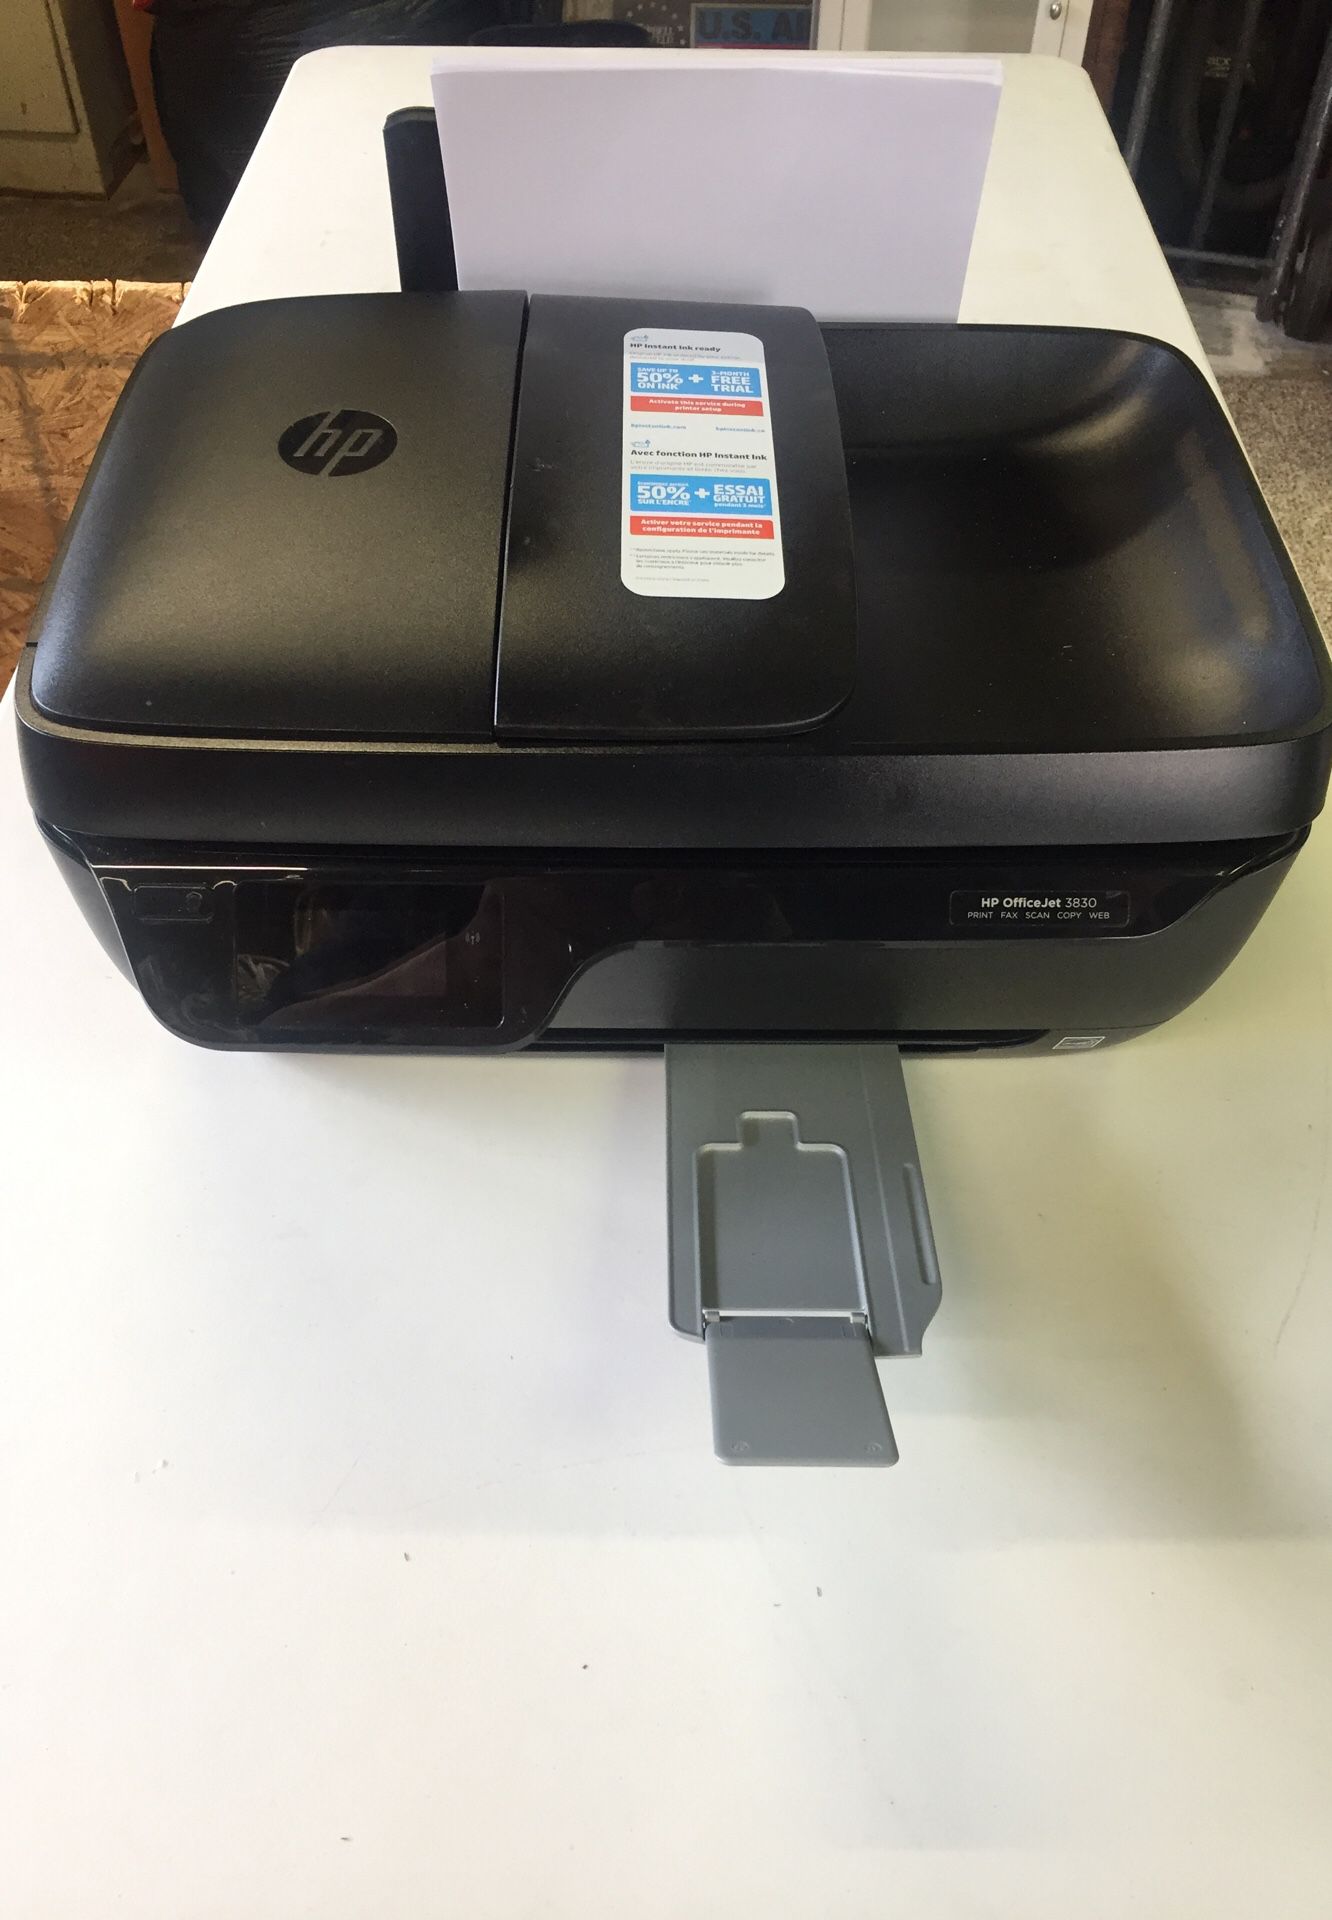 Hp all in one wireless printer